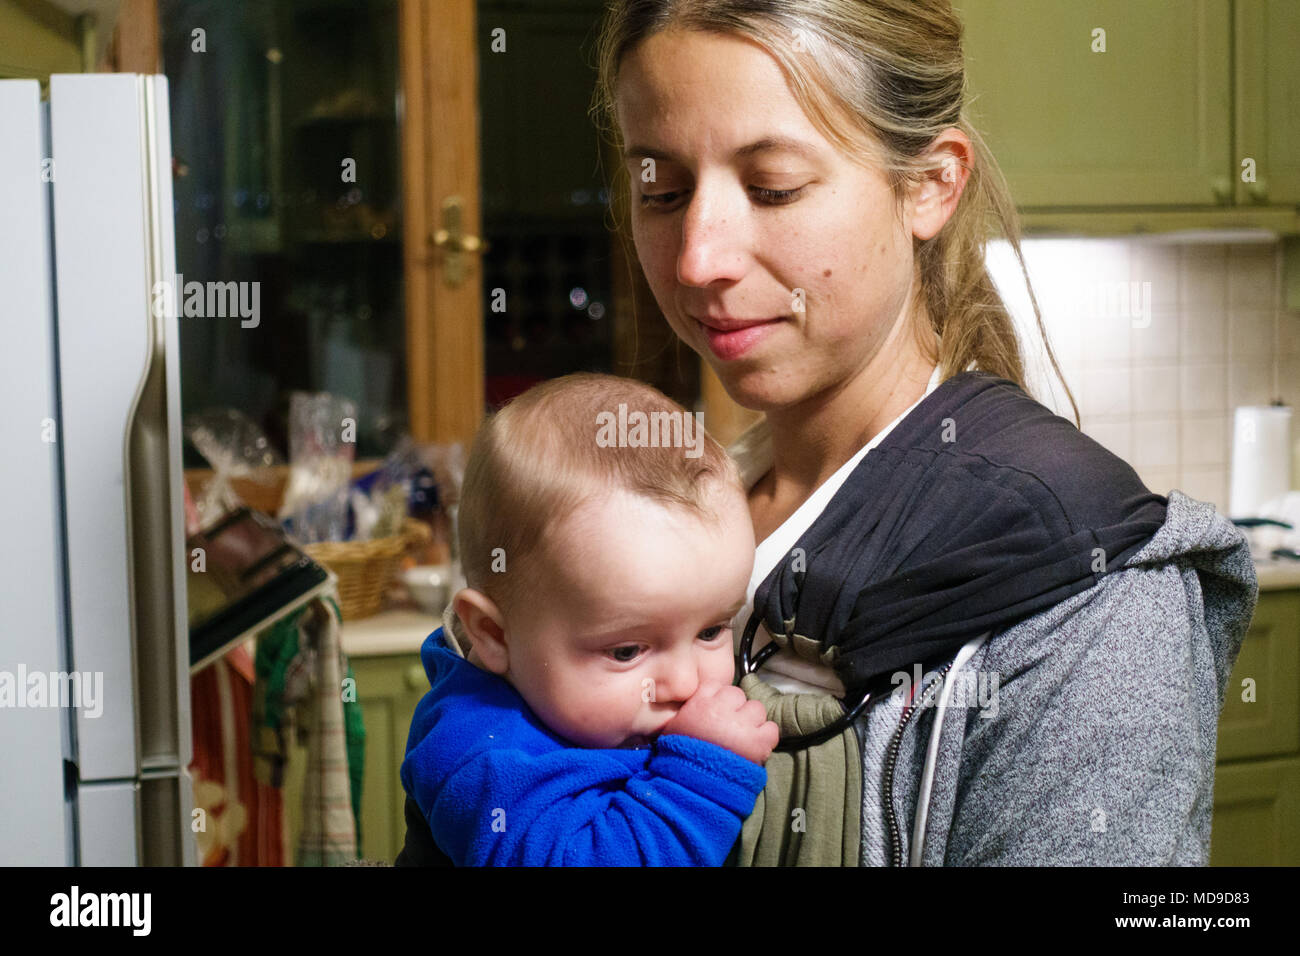 Mother carrying baby boy in kitchen, Greece Stock Photo